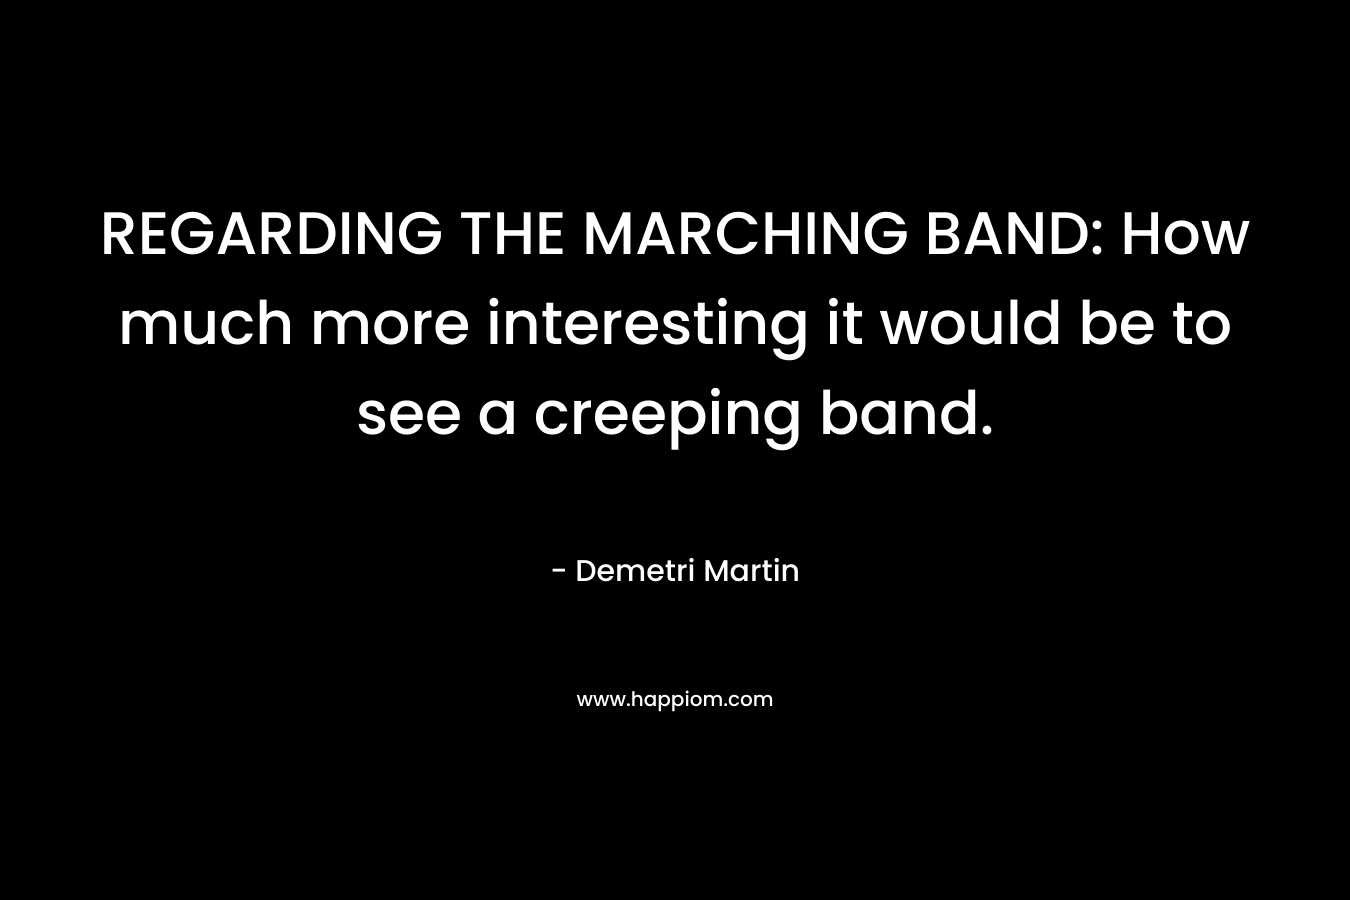 REGARDING THE MARCHING BAND: How much more interesting it would be to see a creeping band. – Demetri Martin